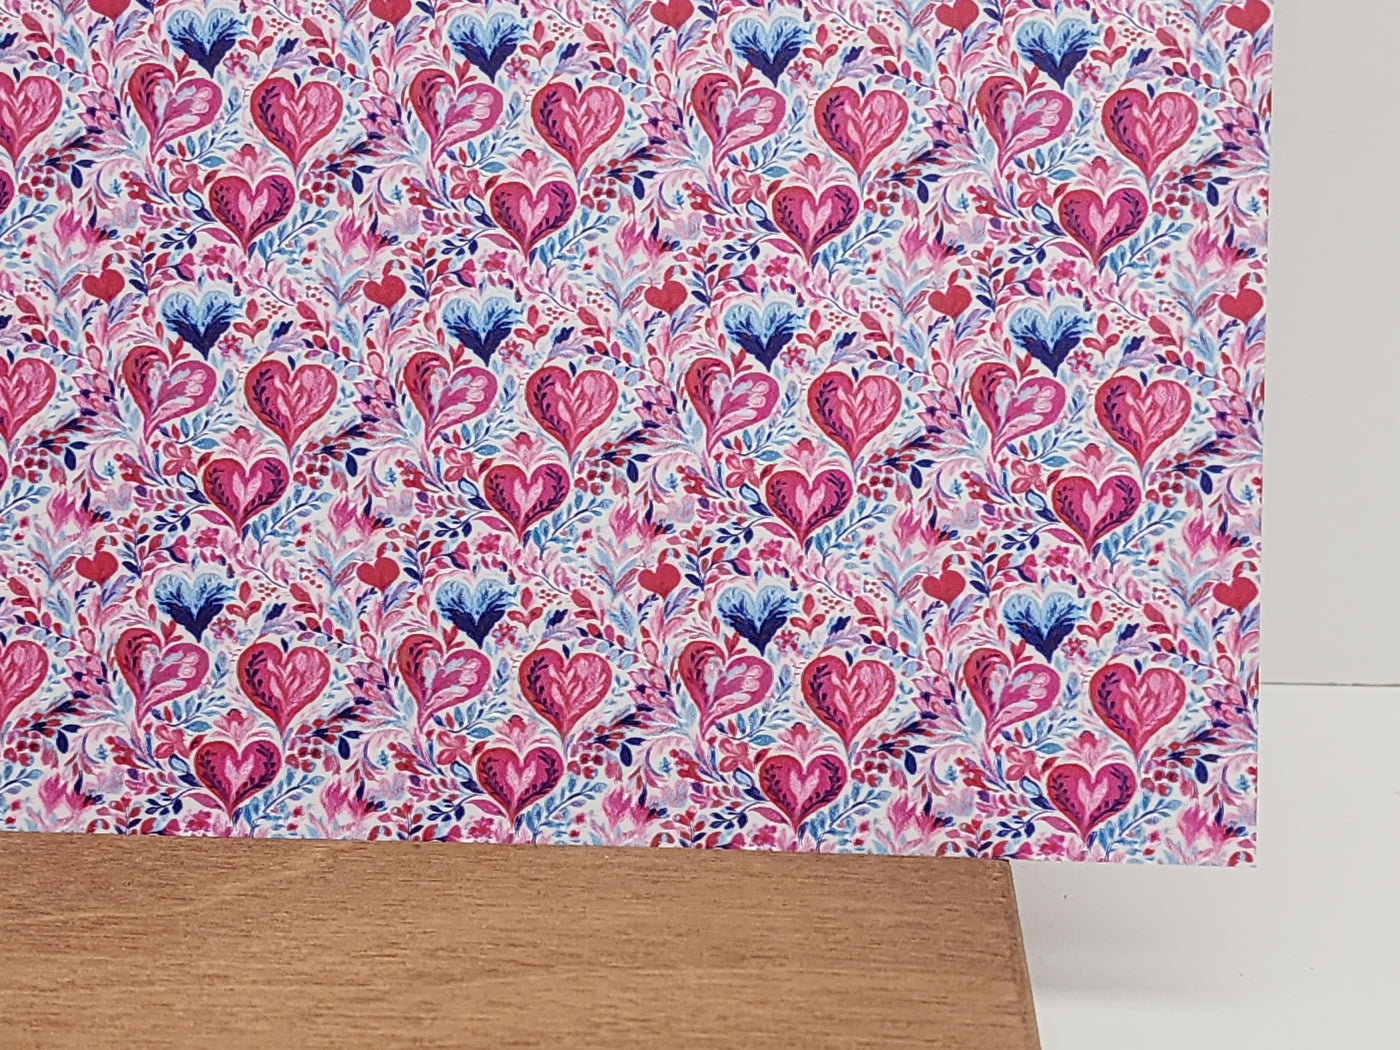 PatternPly® Micro Pink and Teal Hearts